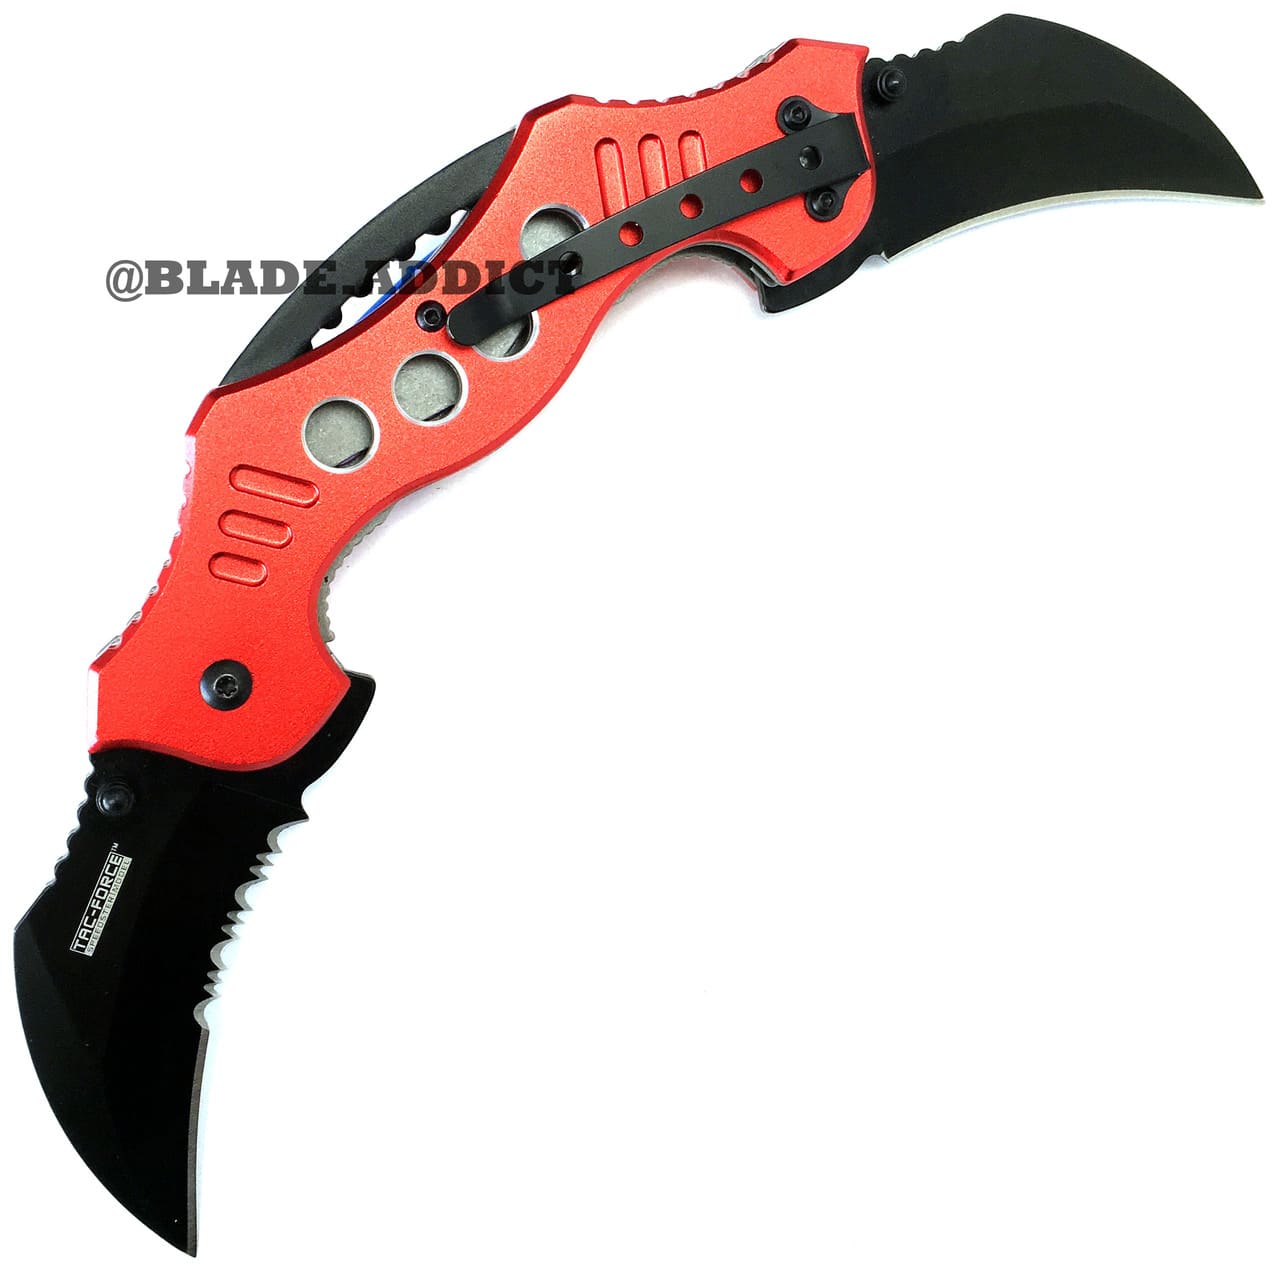 TWIN DUAL BLADE Karambit Claw SPRING ASSISTED OPEN Combat Folding POCKET KNIFE